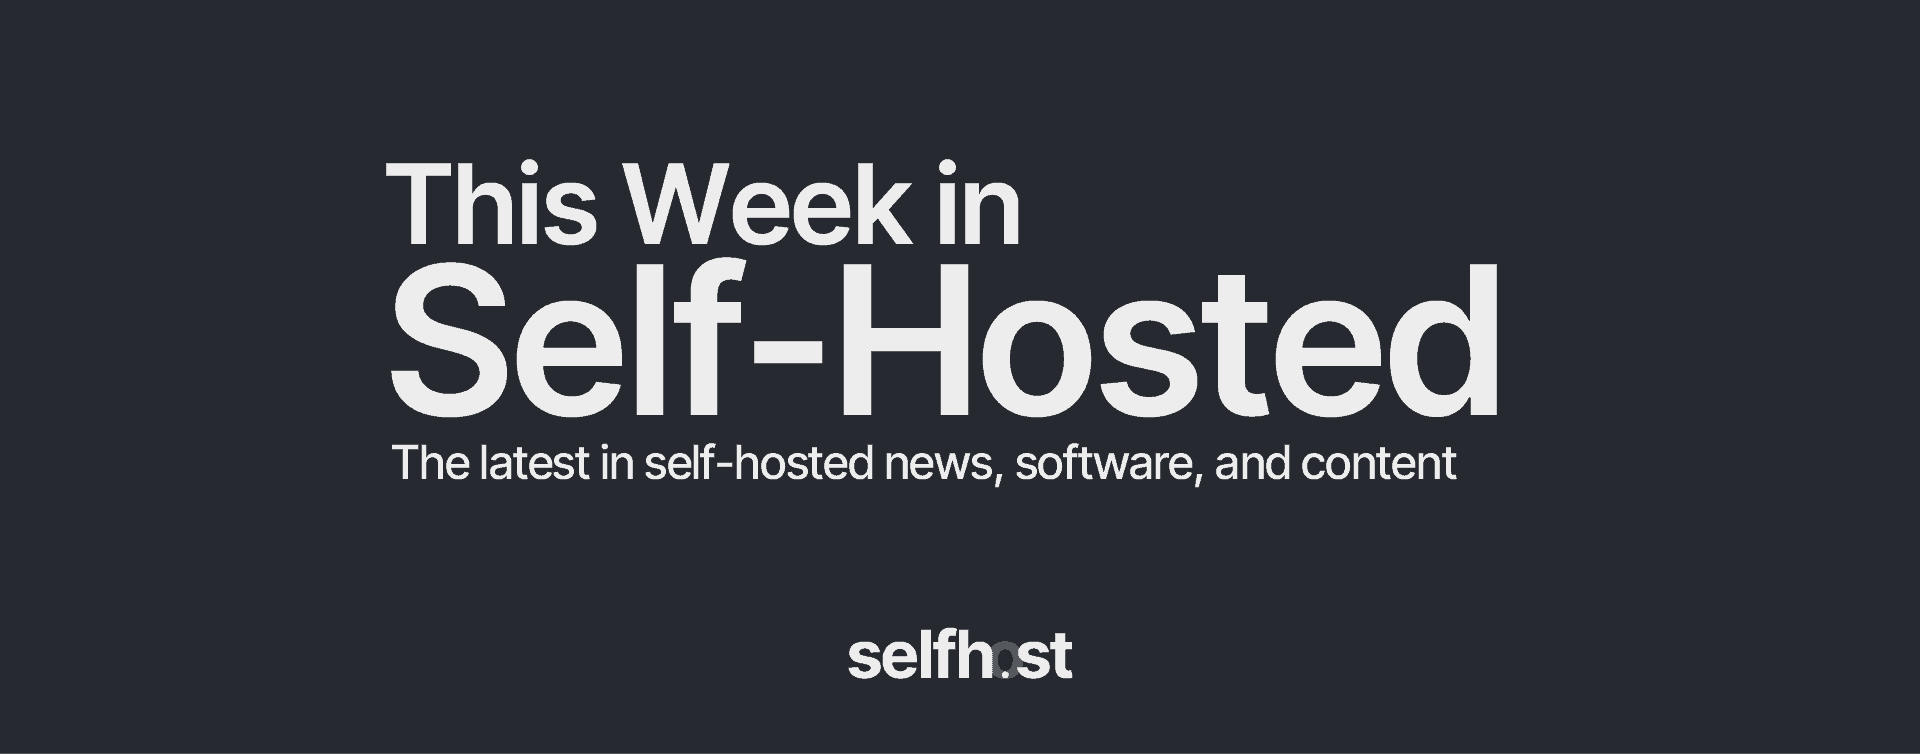 The latest in self-hosted news, software, and content